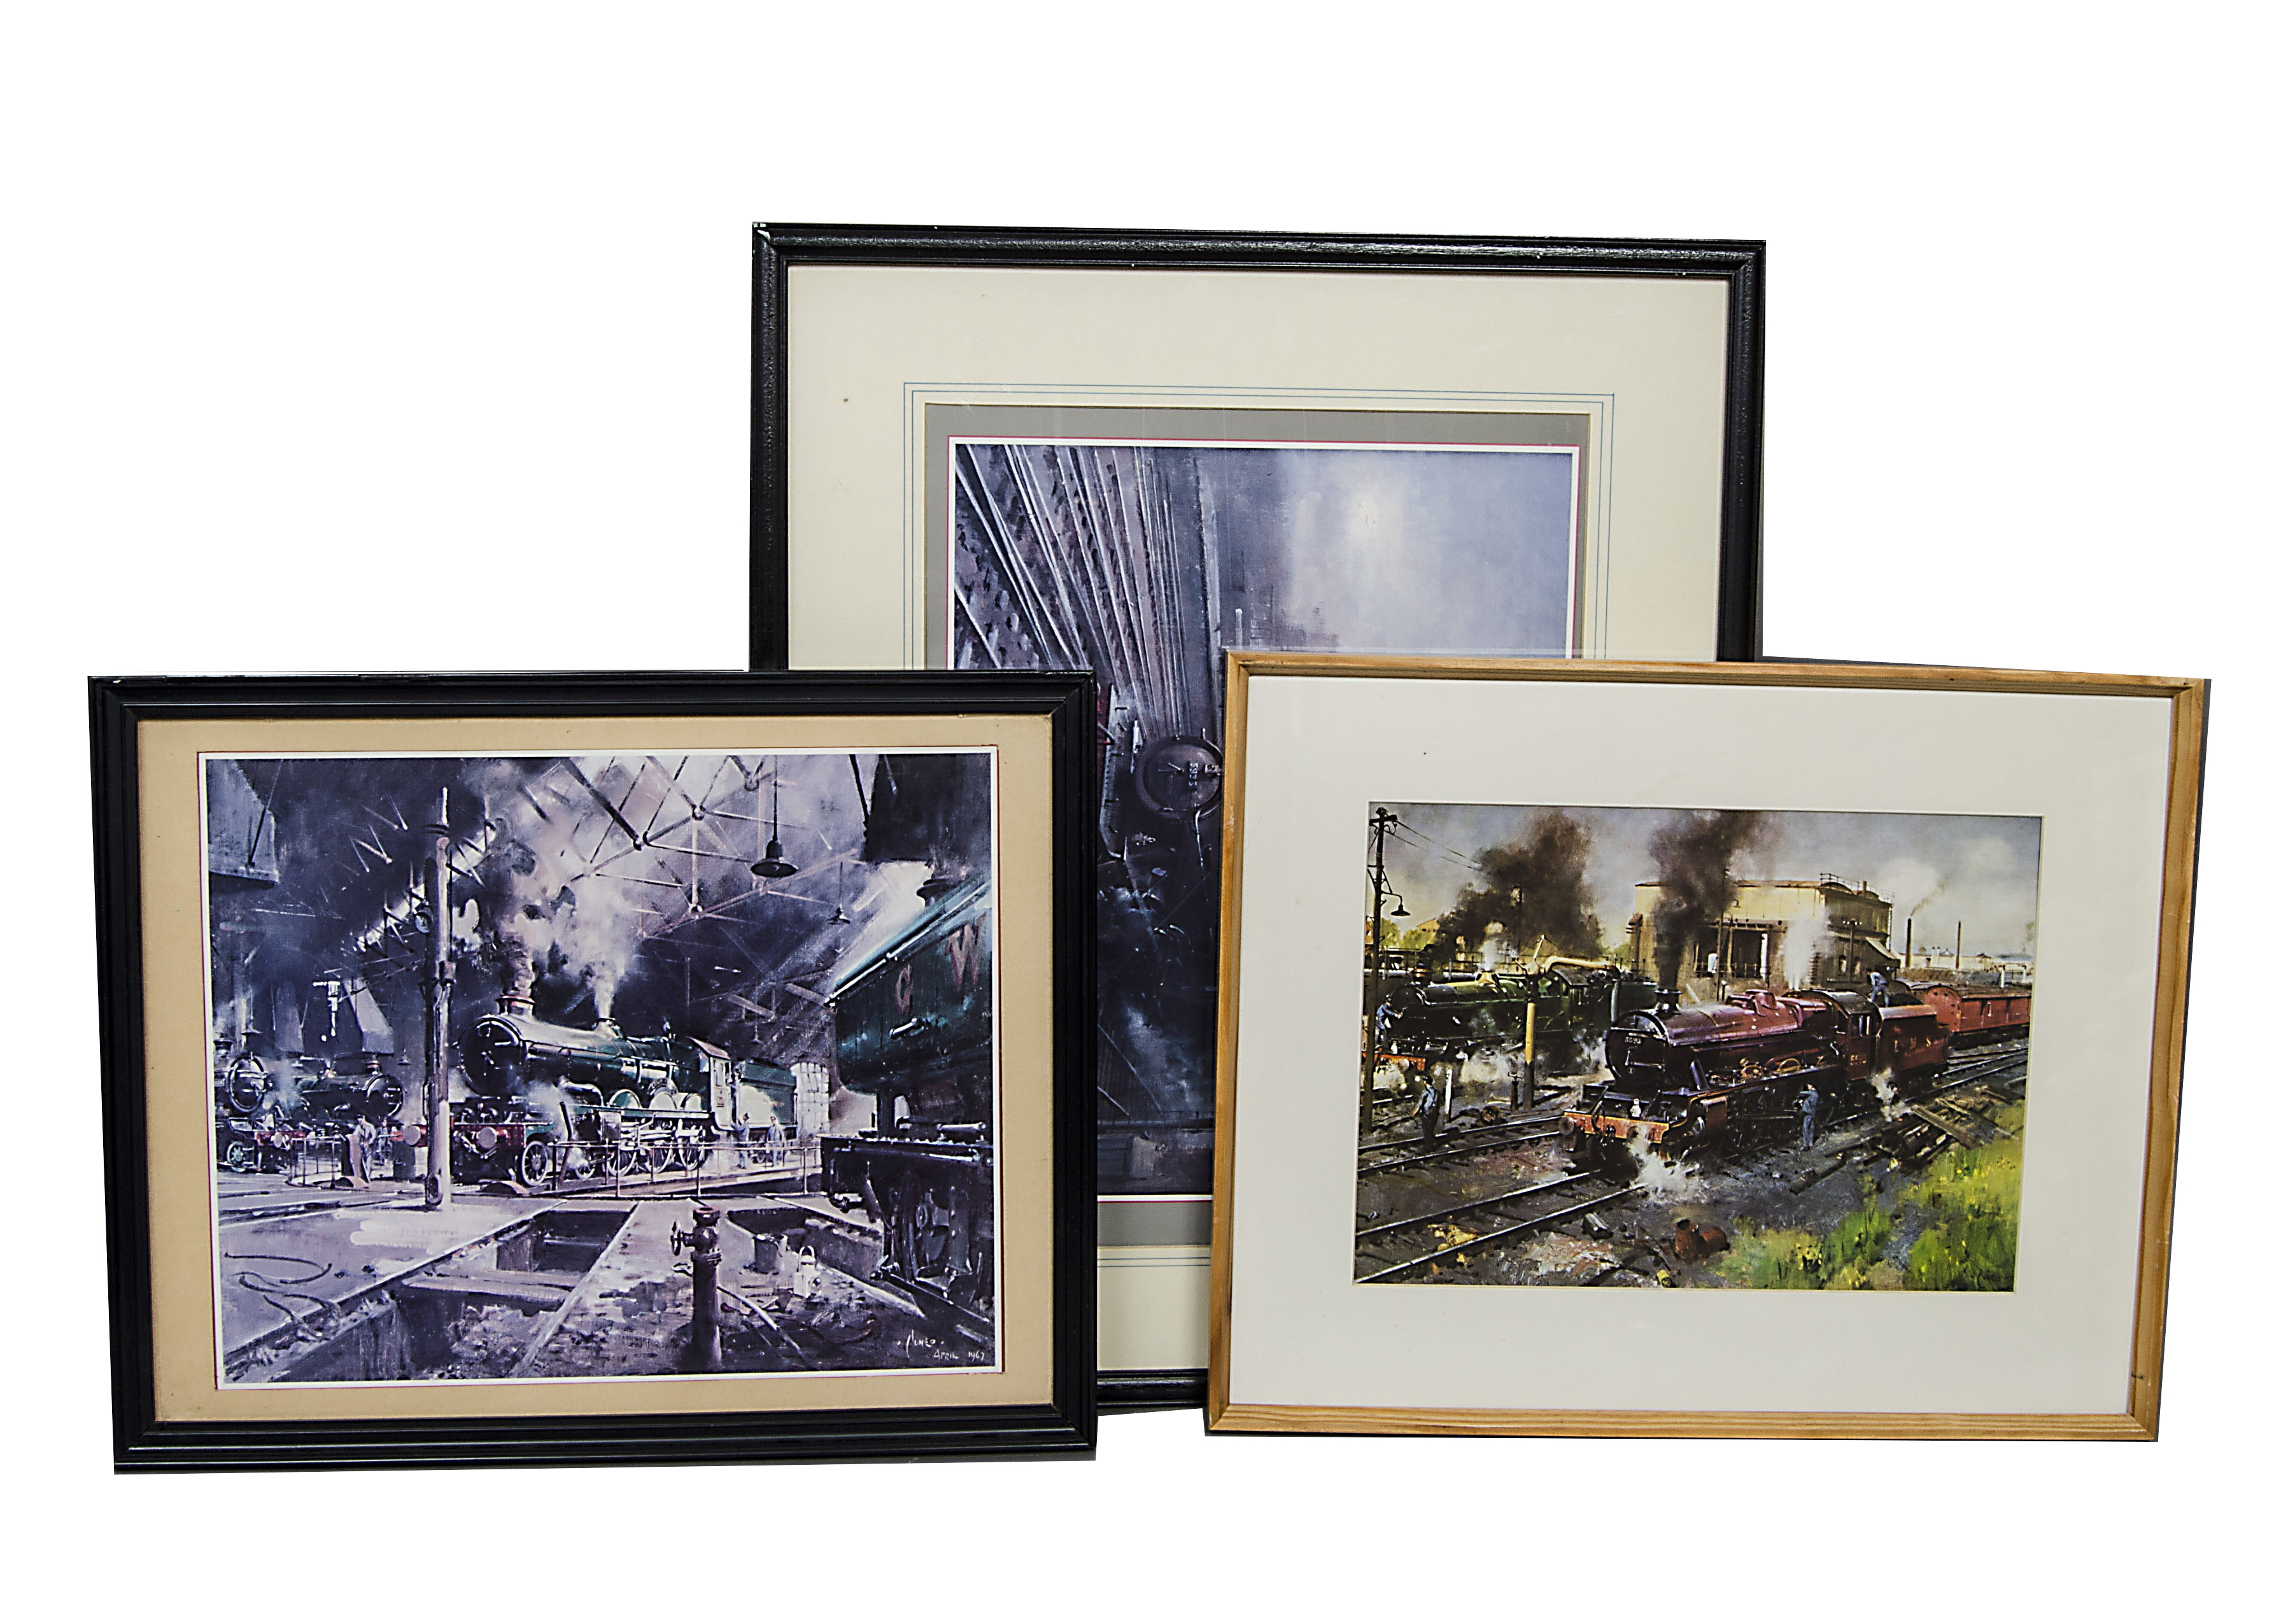 Terence Cuneo Framed Railway Prints: ‘Castles at Tyseley’, 5593 LMS Jubilee ‘Kolhapur’ and ‘